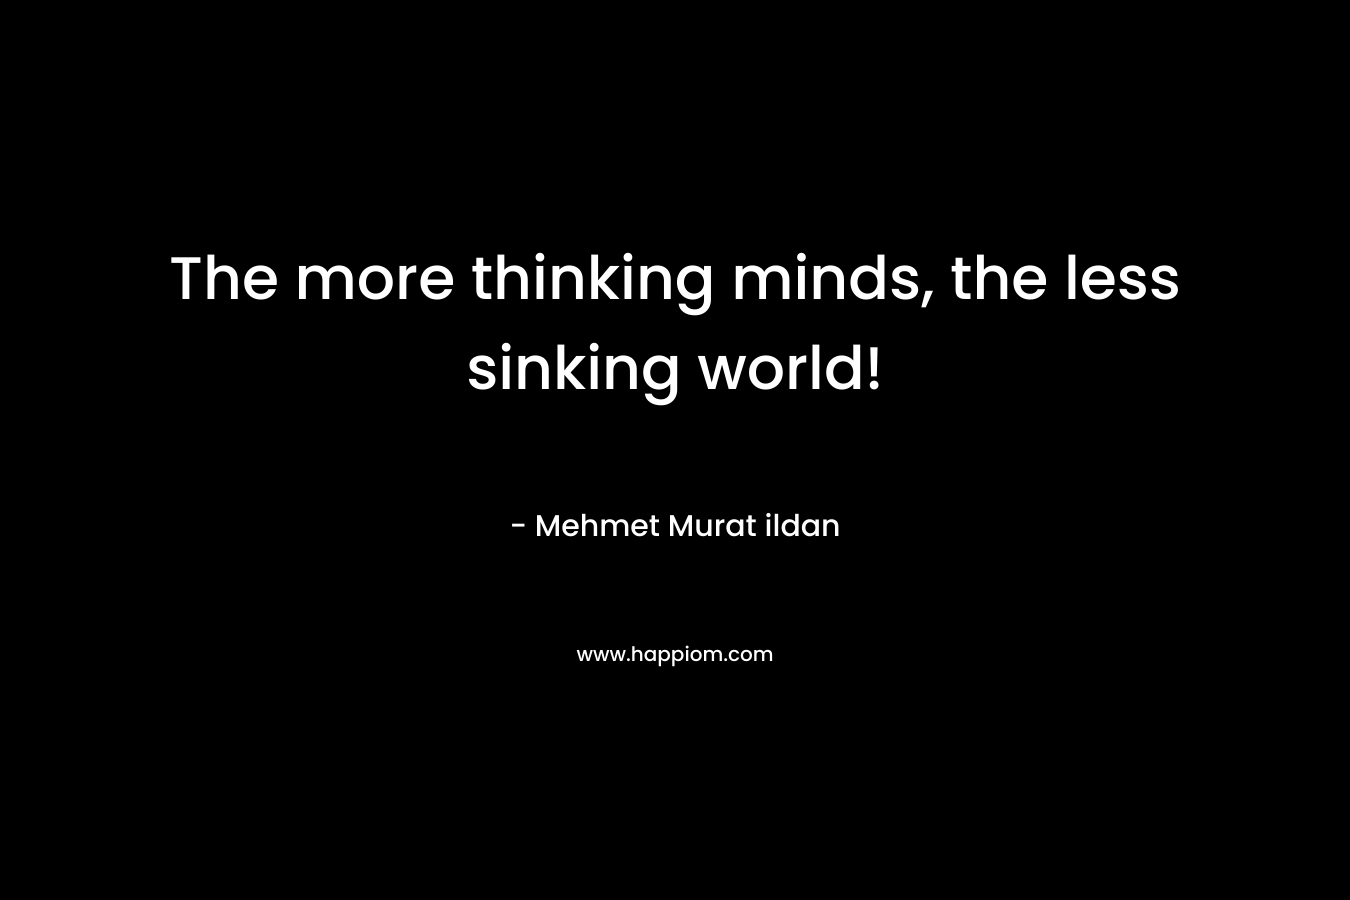 The more thinking minds, the less sinking world!